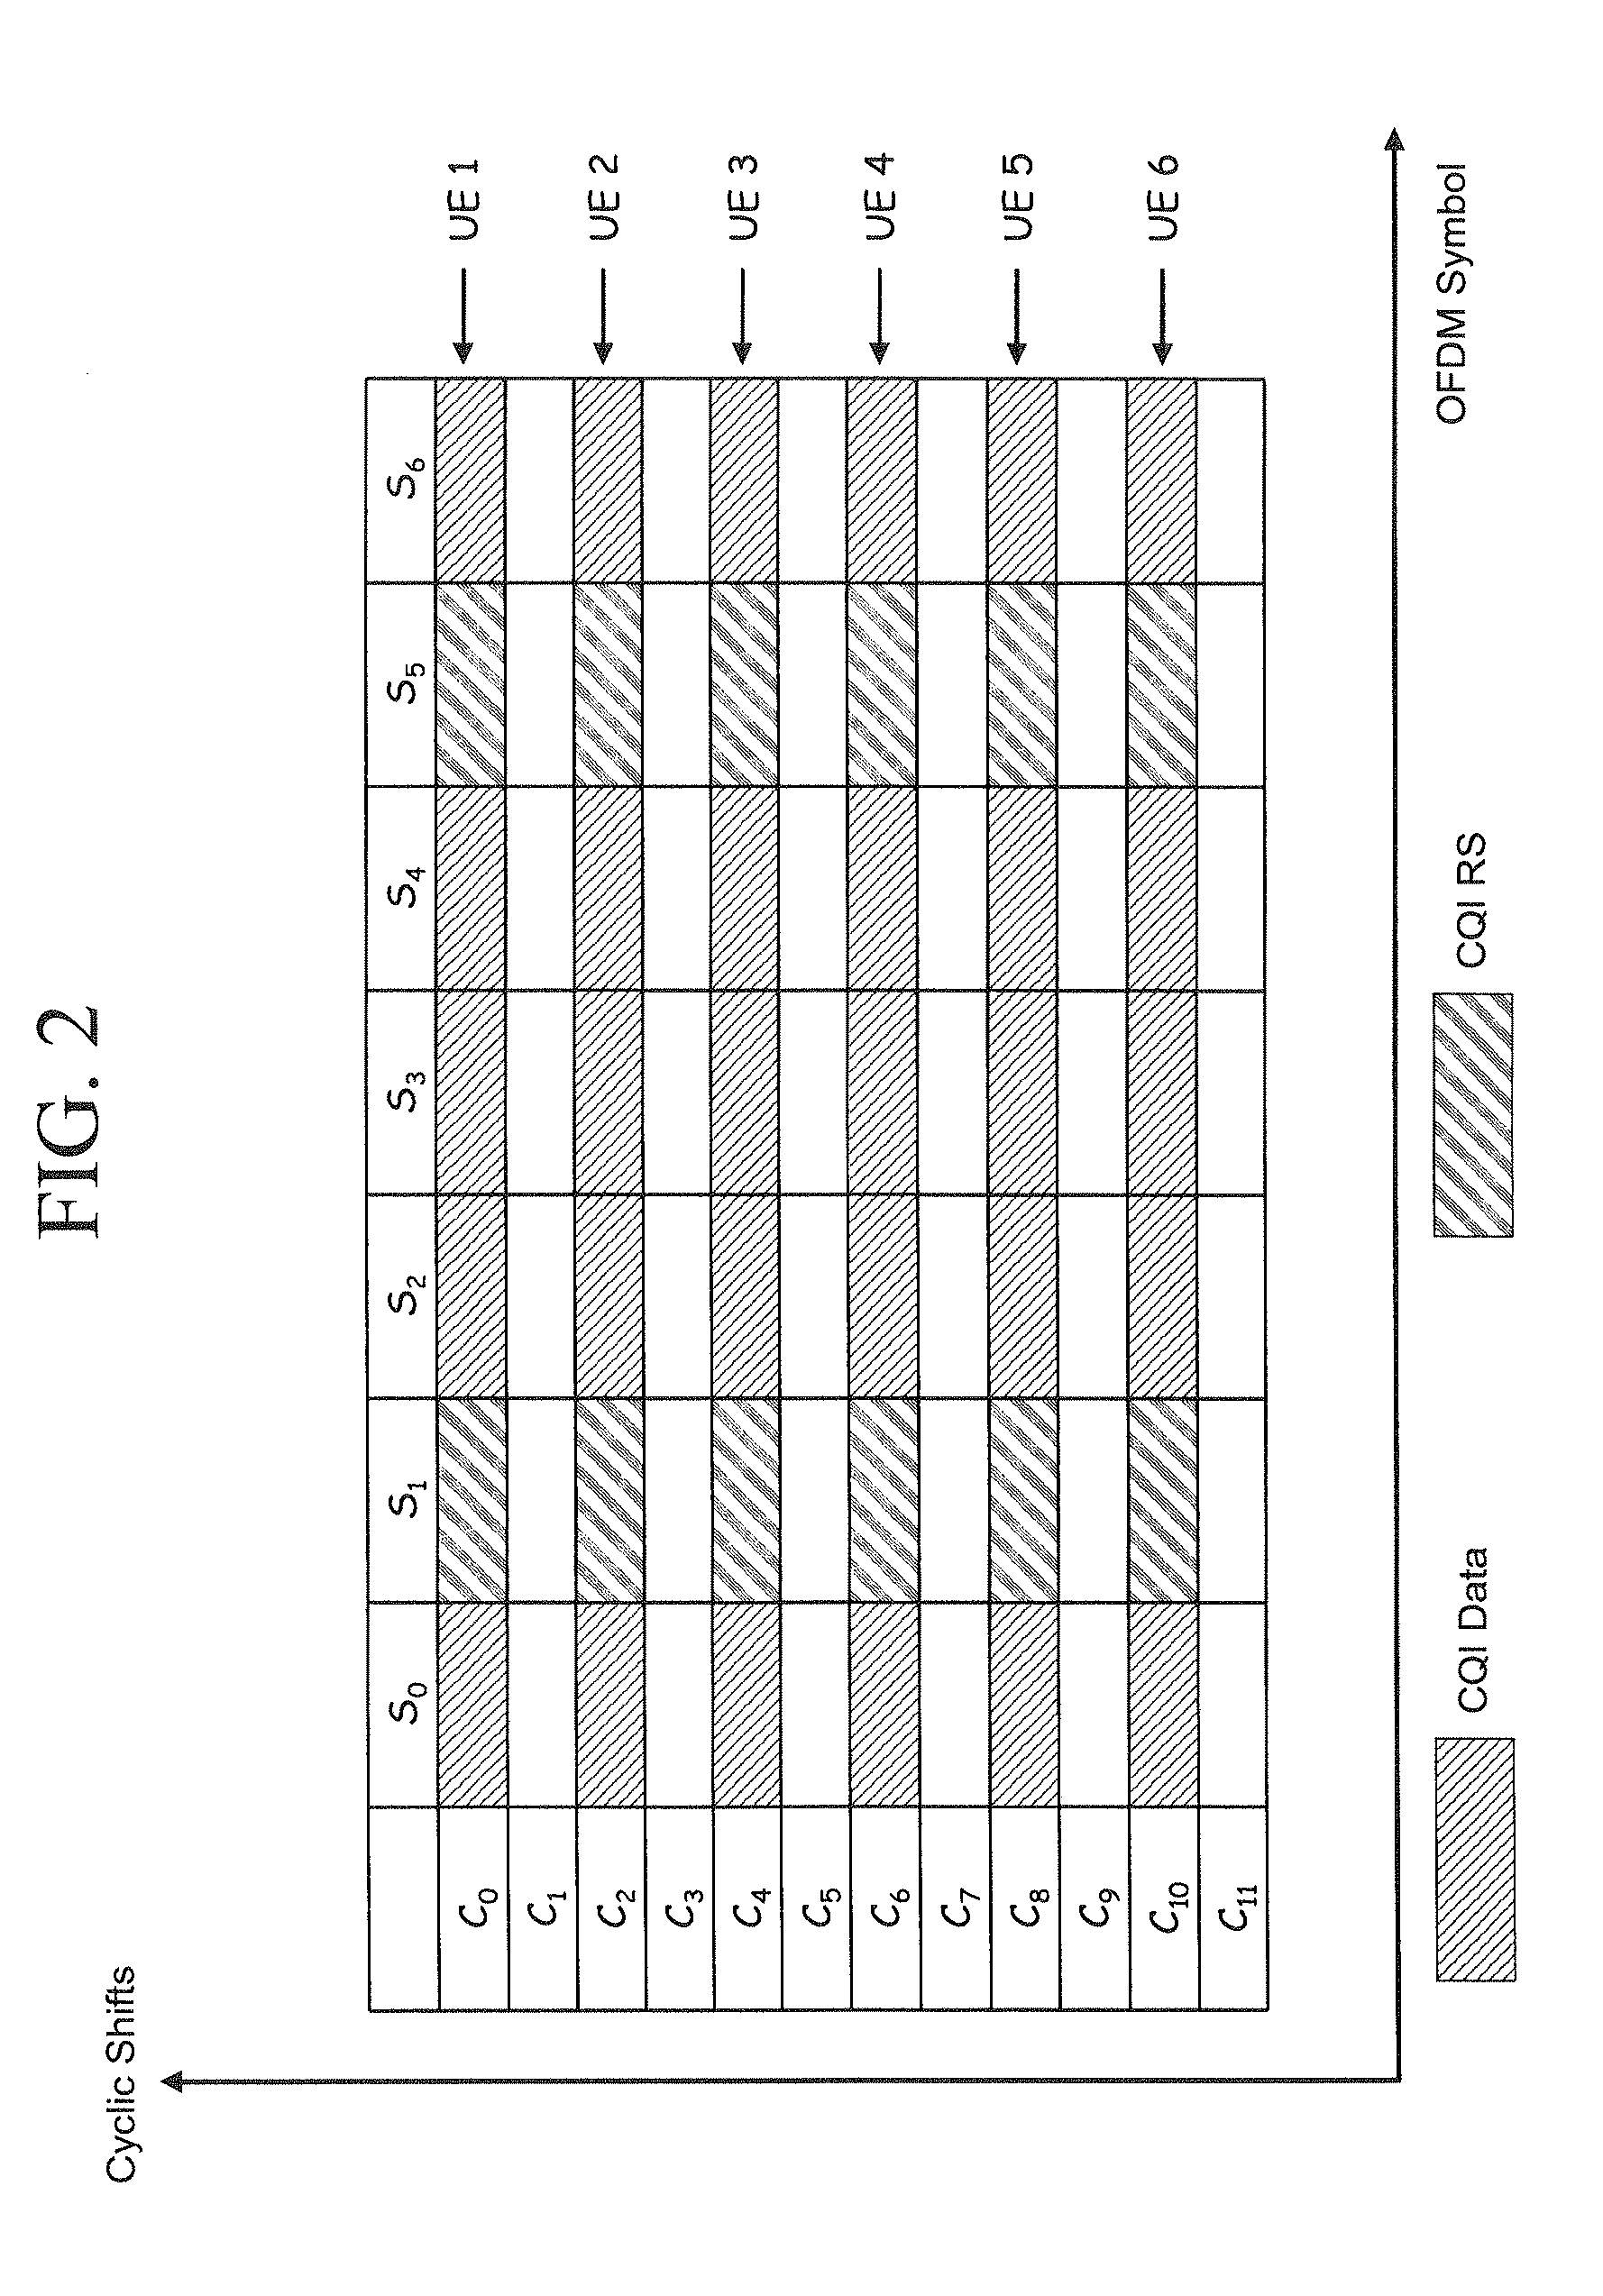 Resource remapping and regrouping in a wireless communication system